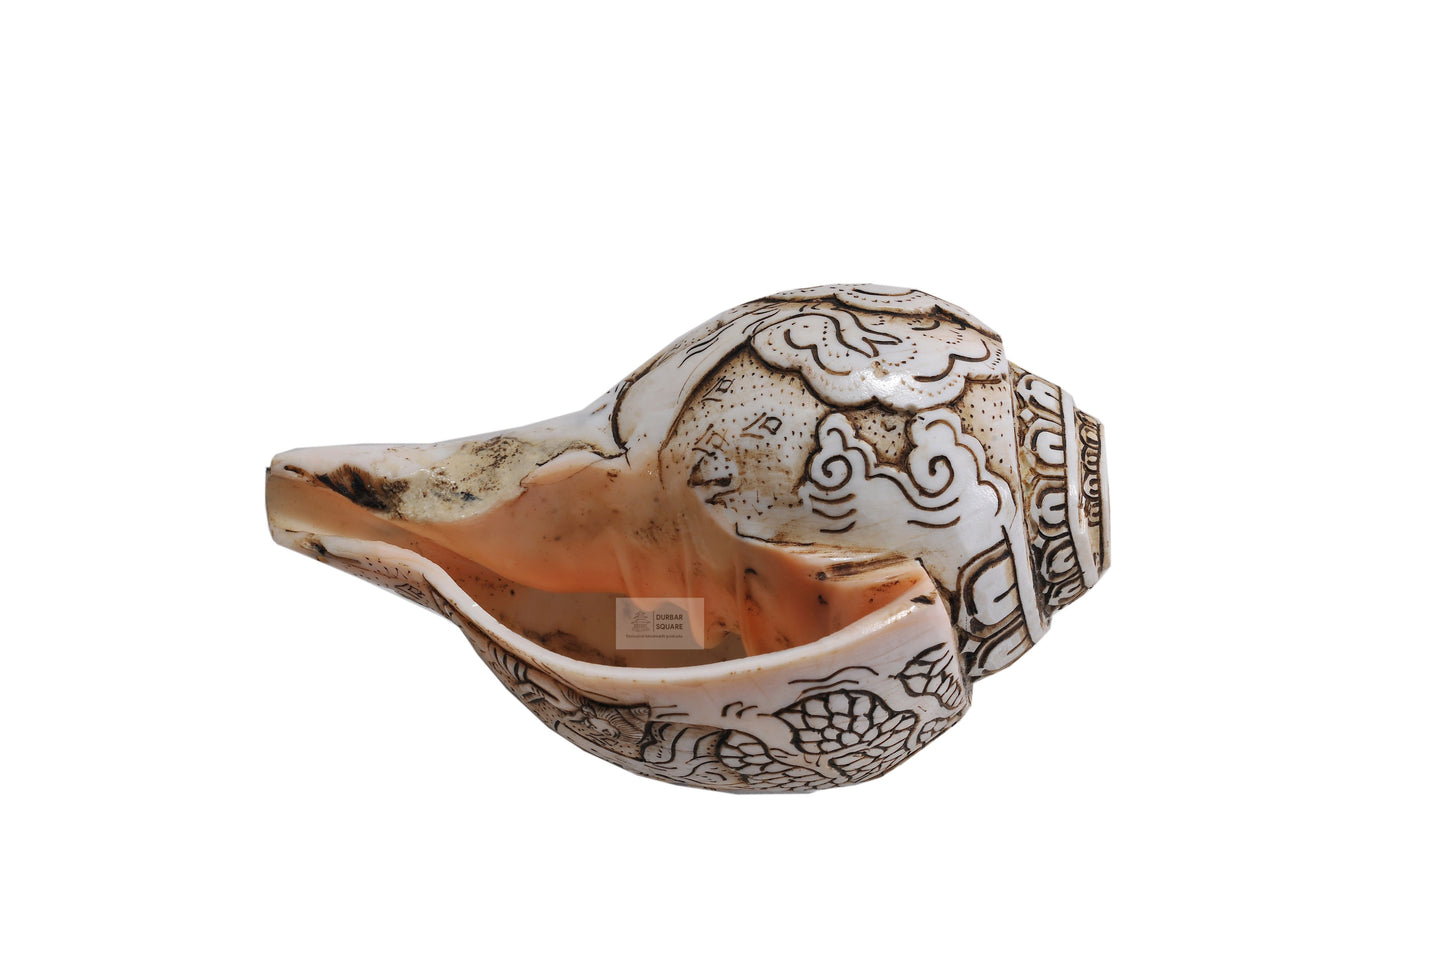 Carved Sankha (Conch Shell)